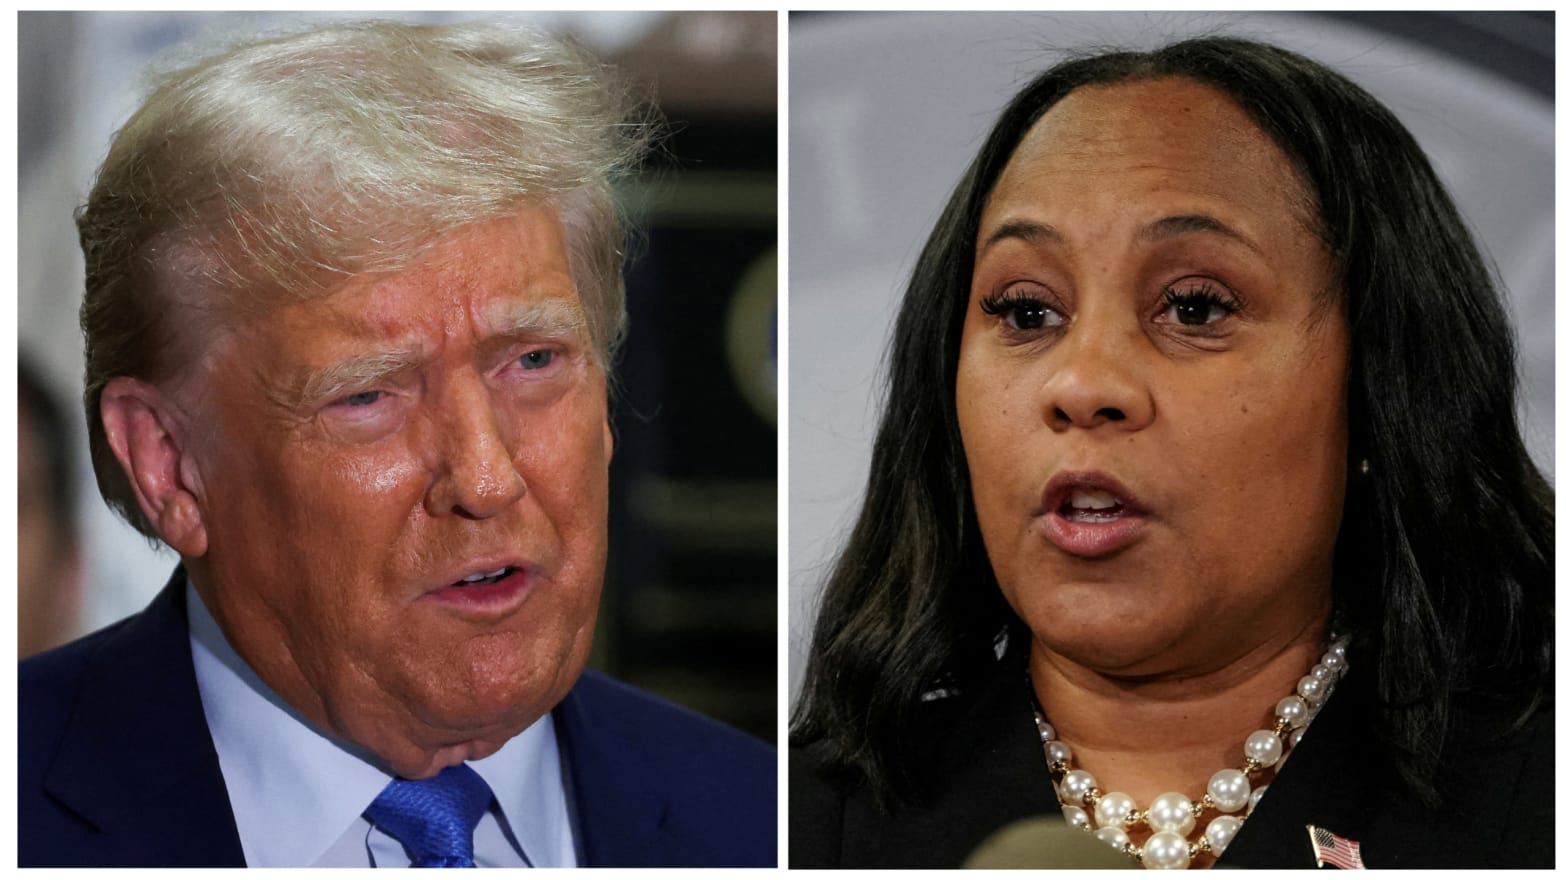 Images of Donald Trump and Fulton County D.A. Fani Willis